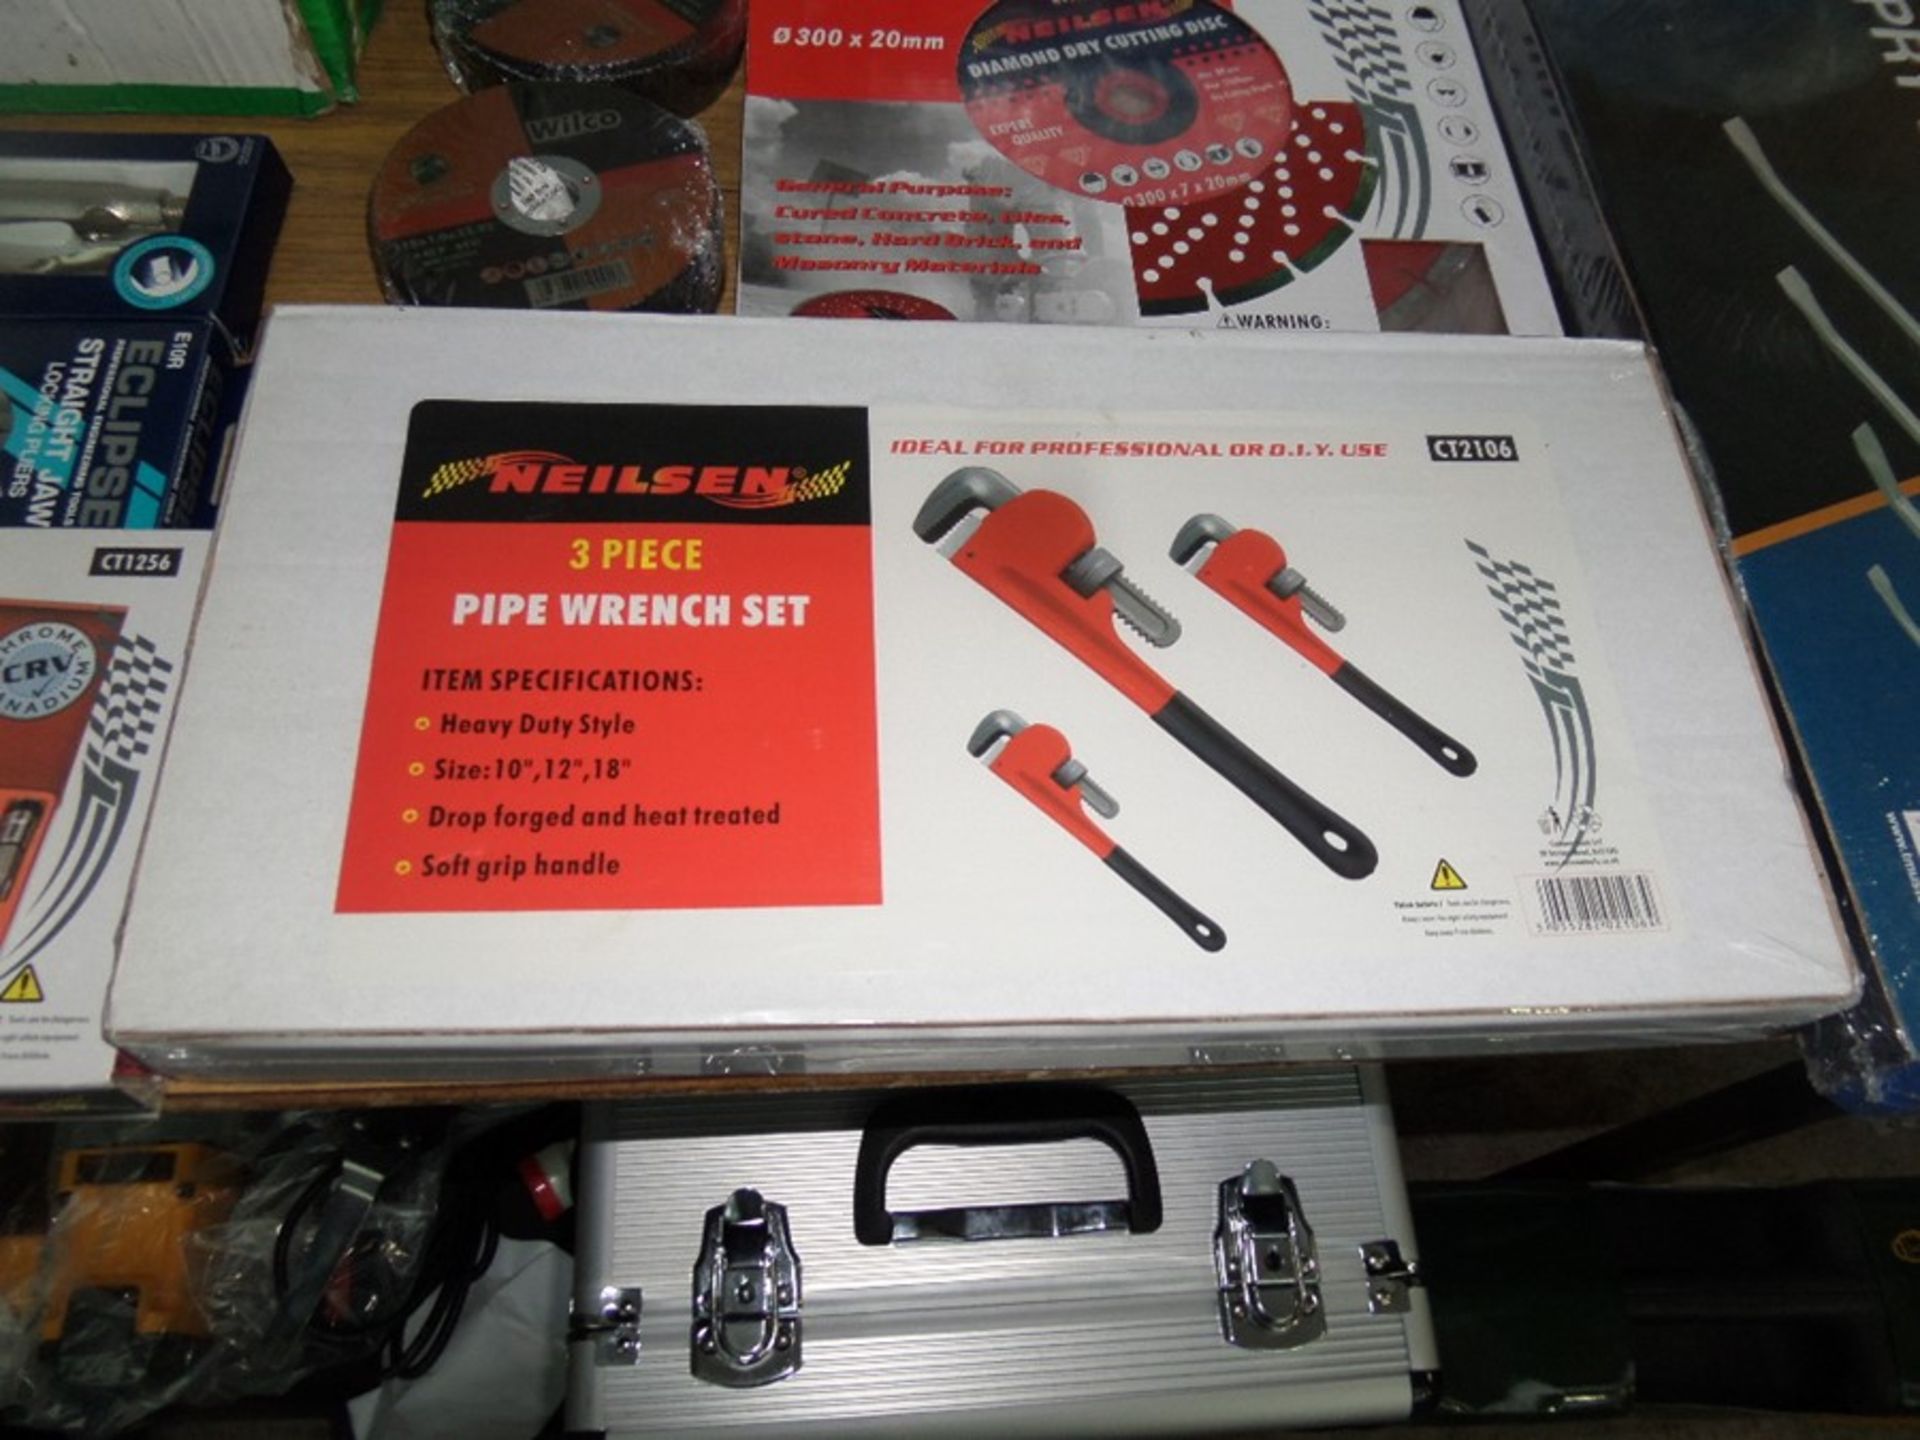 NEW 3 PIECE PIPE WRENCH SET